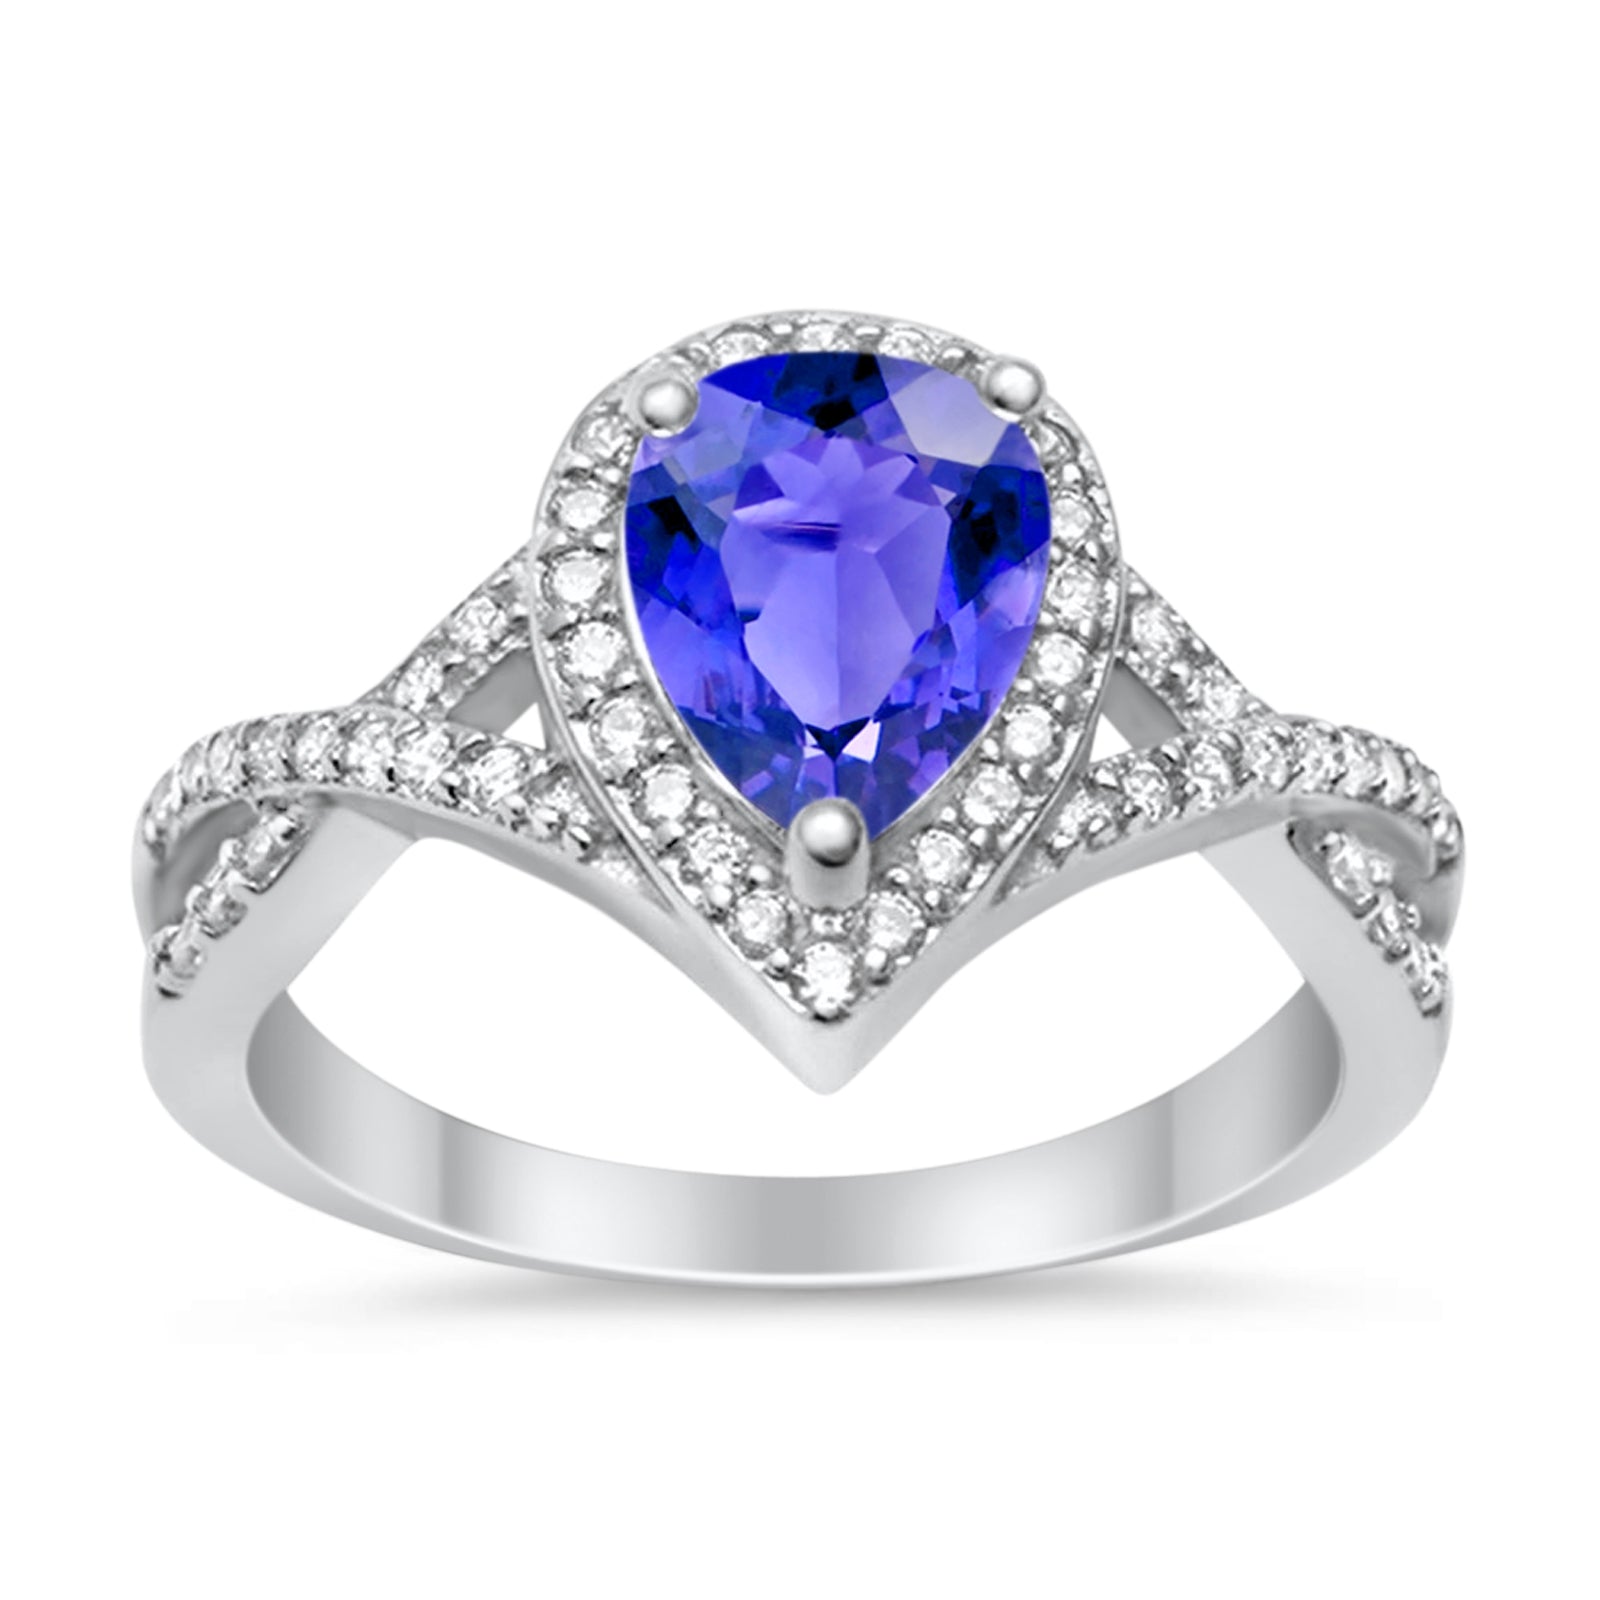 Teardrop Wedding Promise Ring Round Simulated Tanzanite CZ 925 Sterling Silver